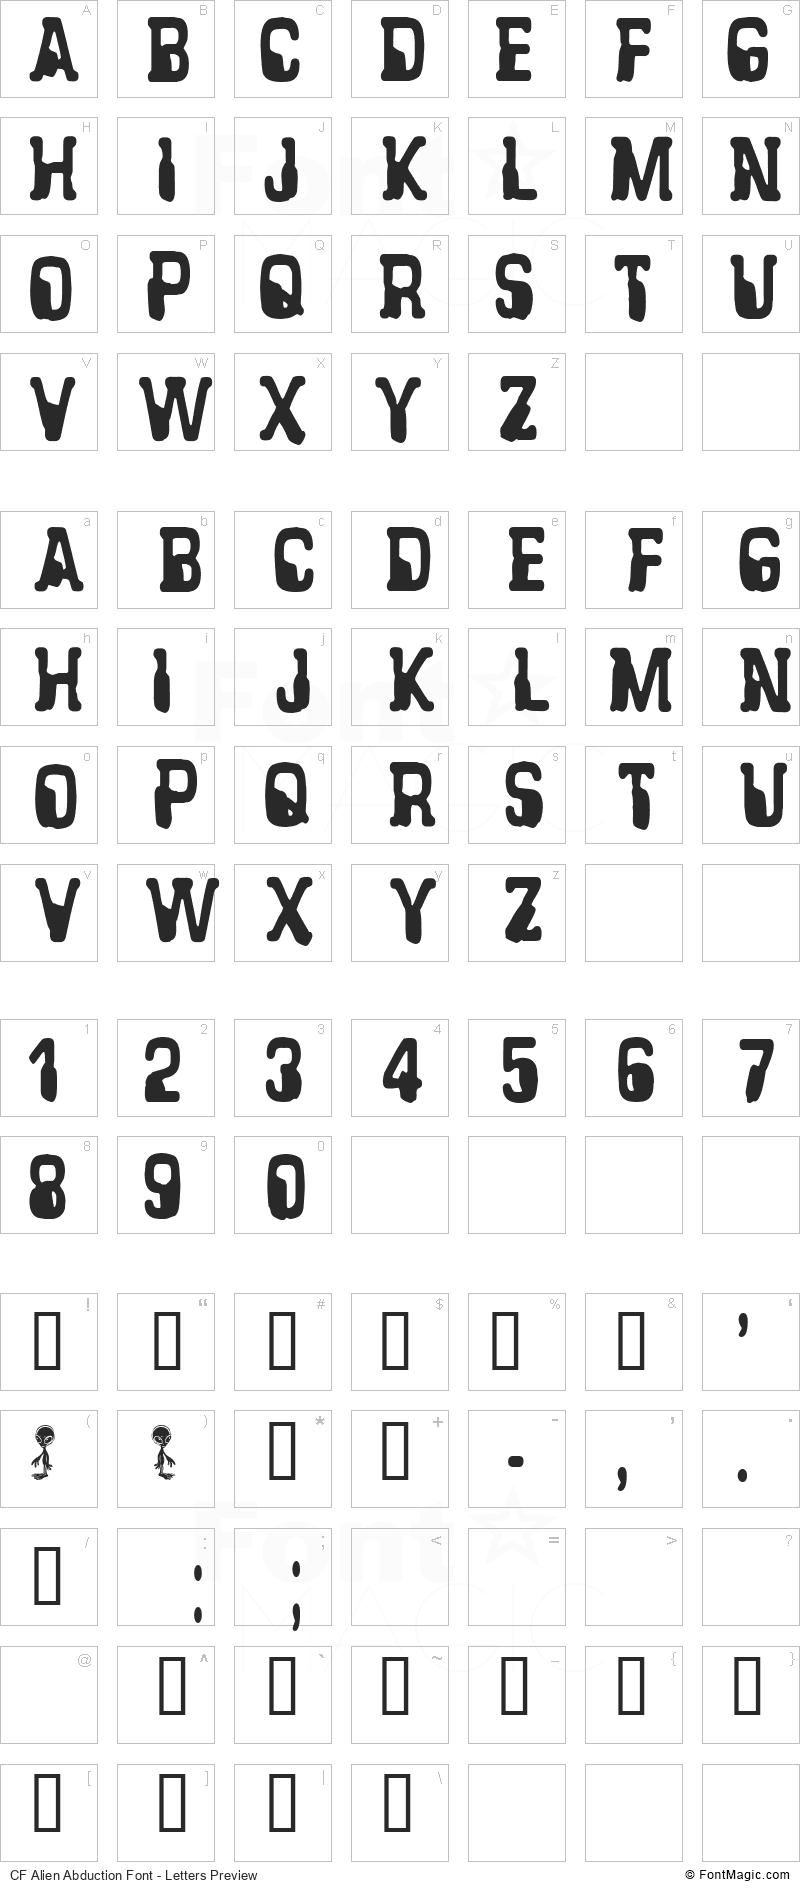 CF Alien Abduction Font - All Latters Preview Chart